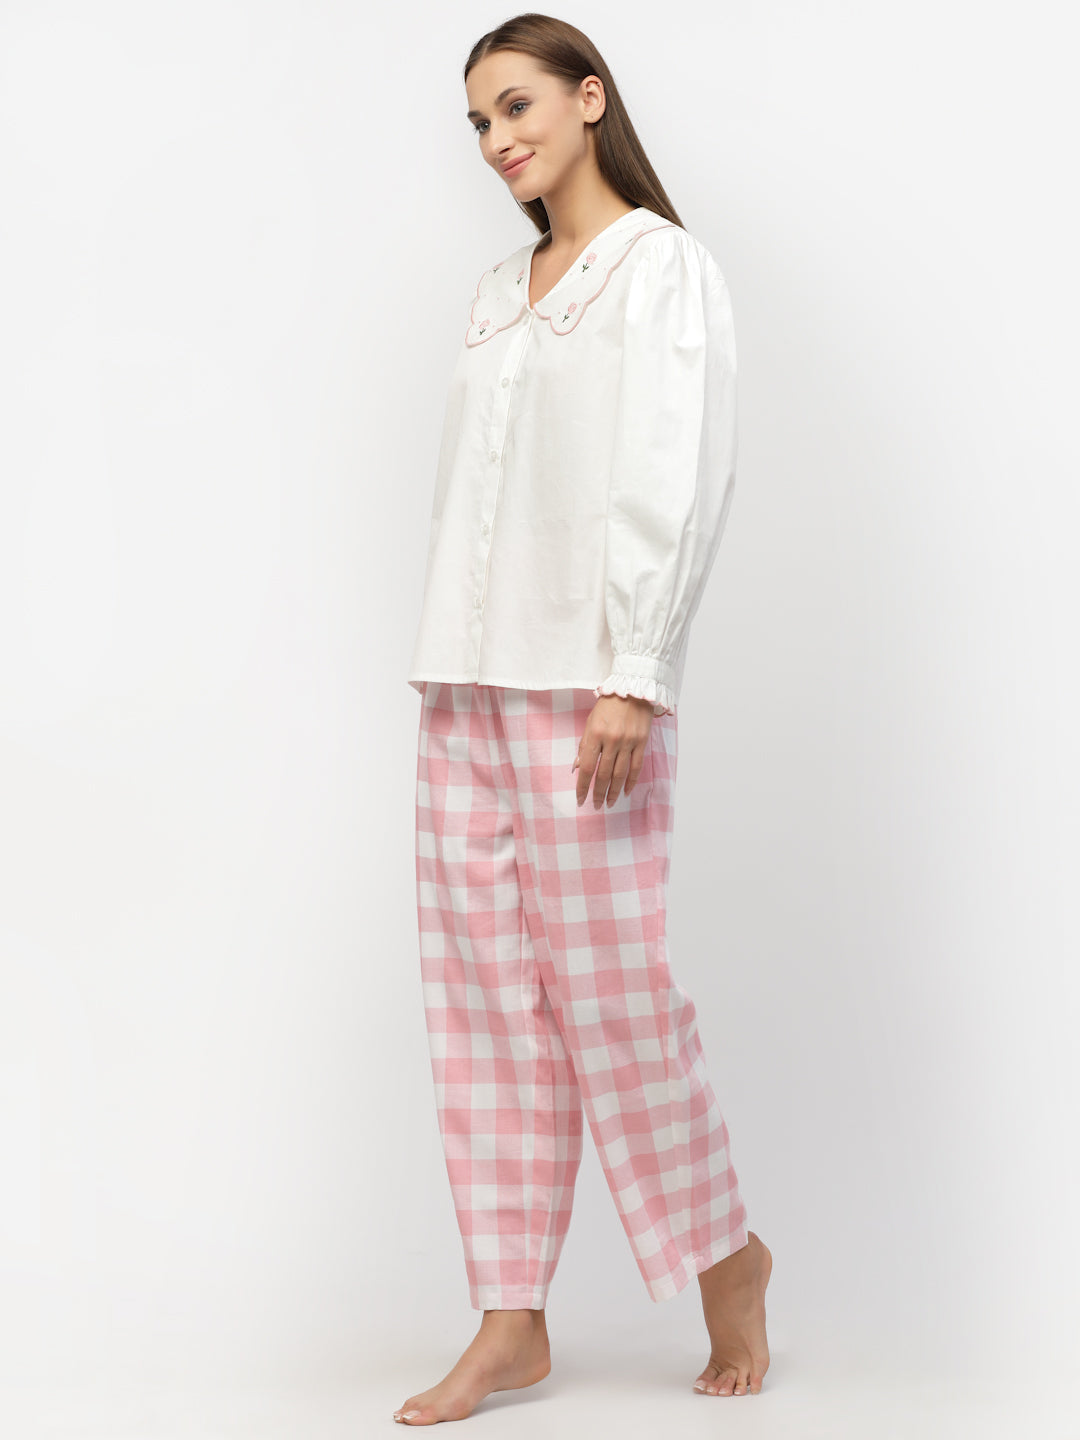 Blanc9 White Solid With Pink Check Cotton Pyjama Set-B9NW78